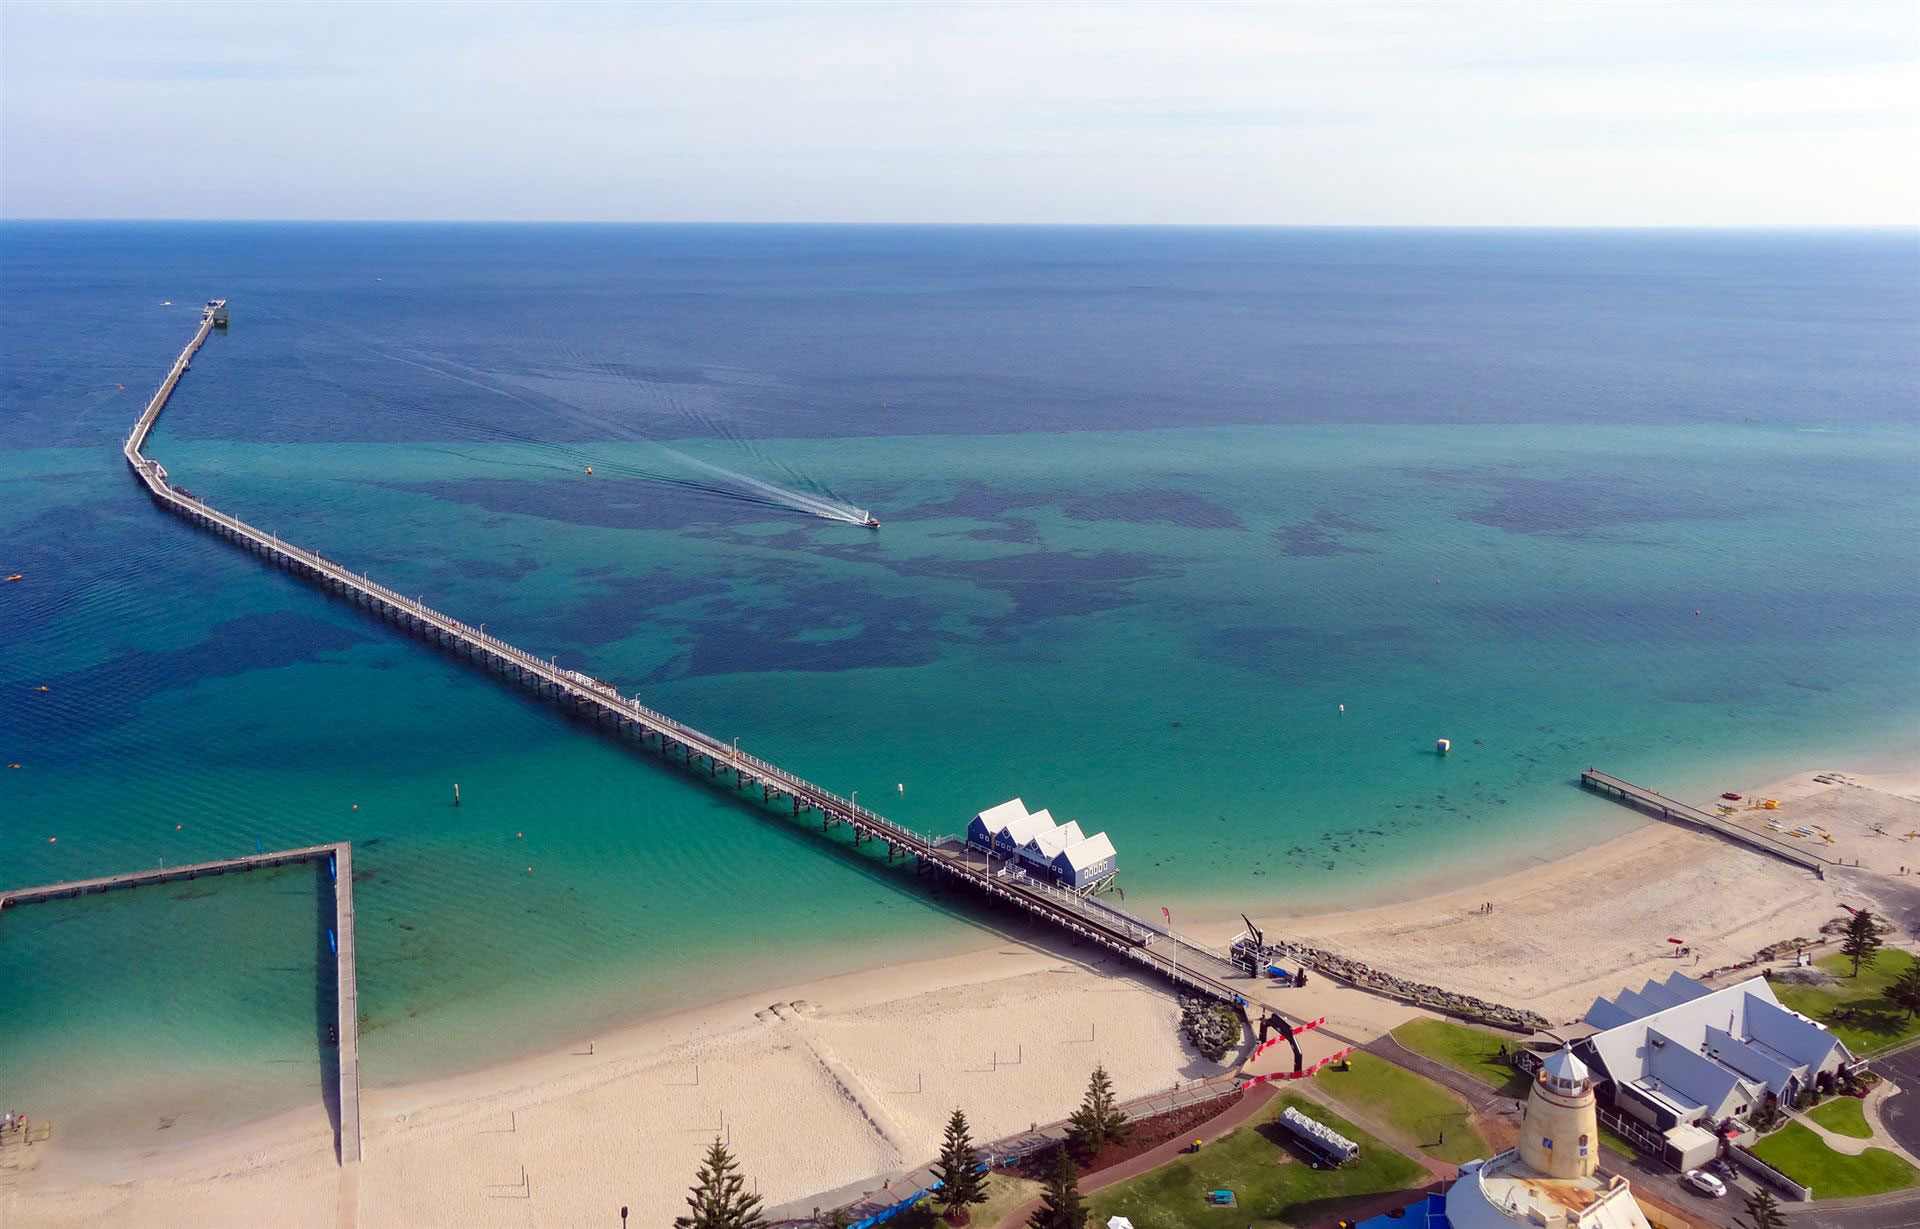 Aerial view of the VOYAGE at the end of the Busselton Jetty pier